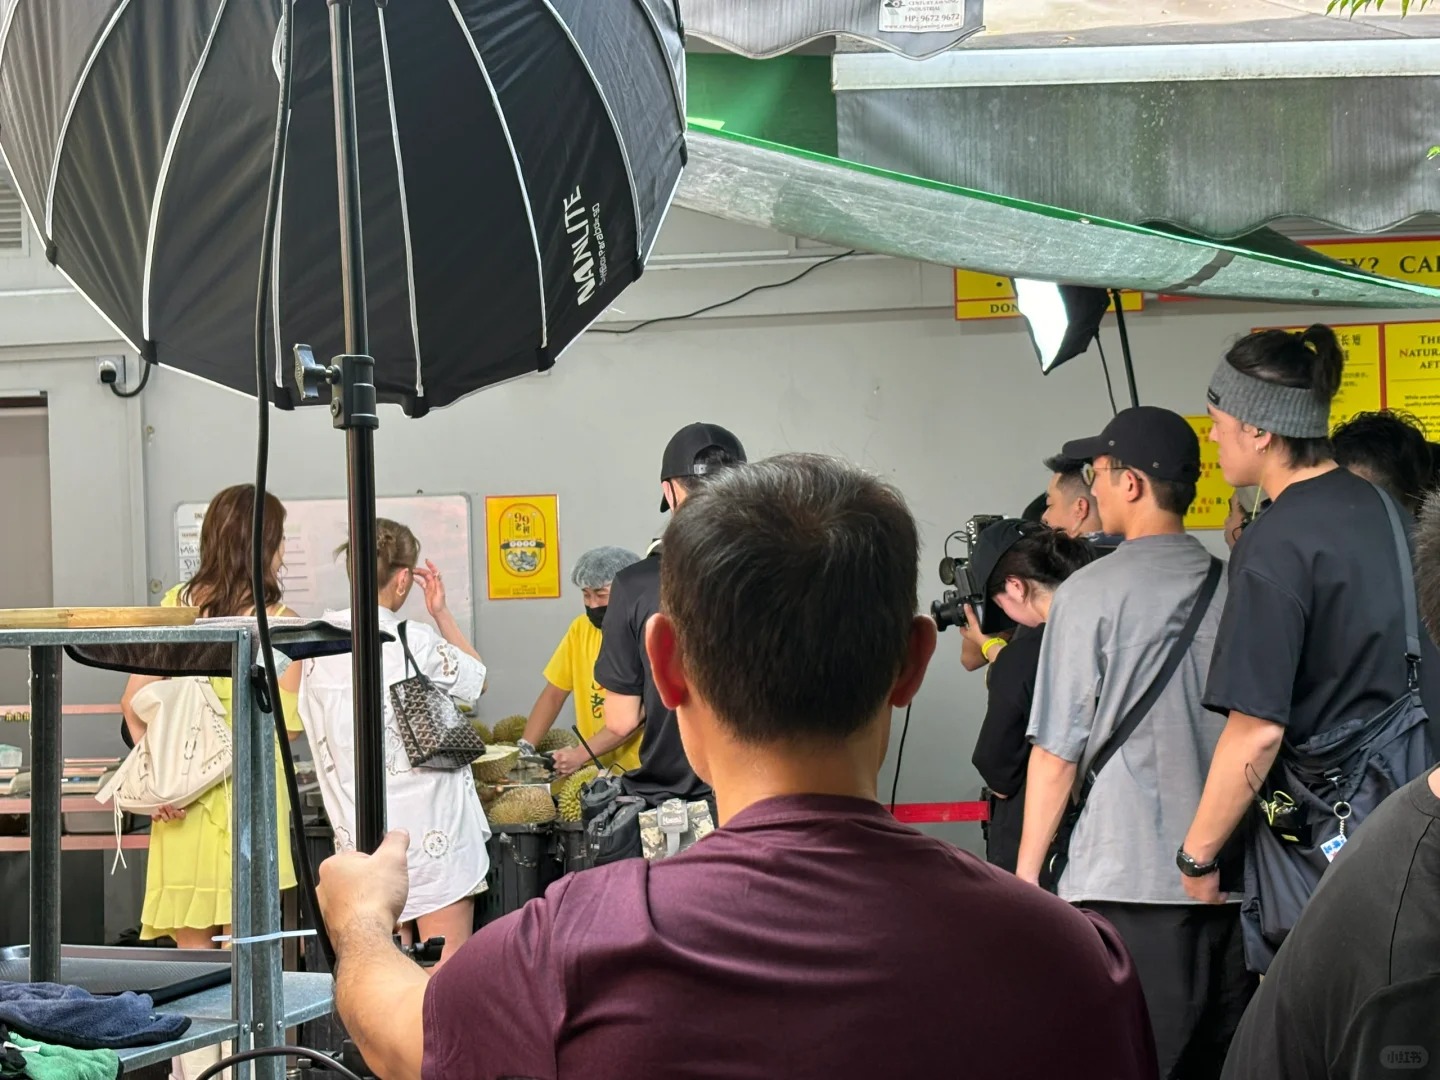 Joey Yung, Charlene Choi and Gillian Chung spotted filming in Singapore